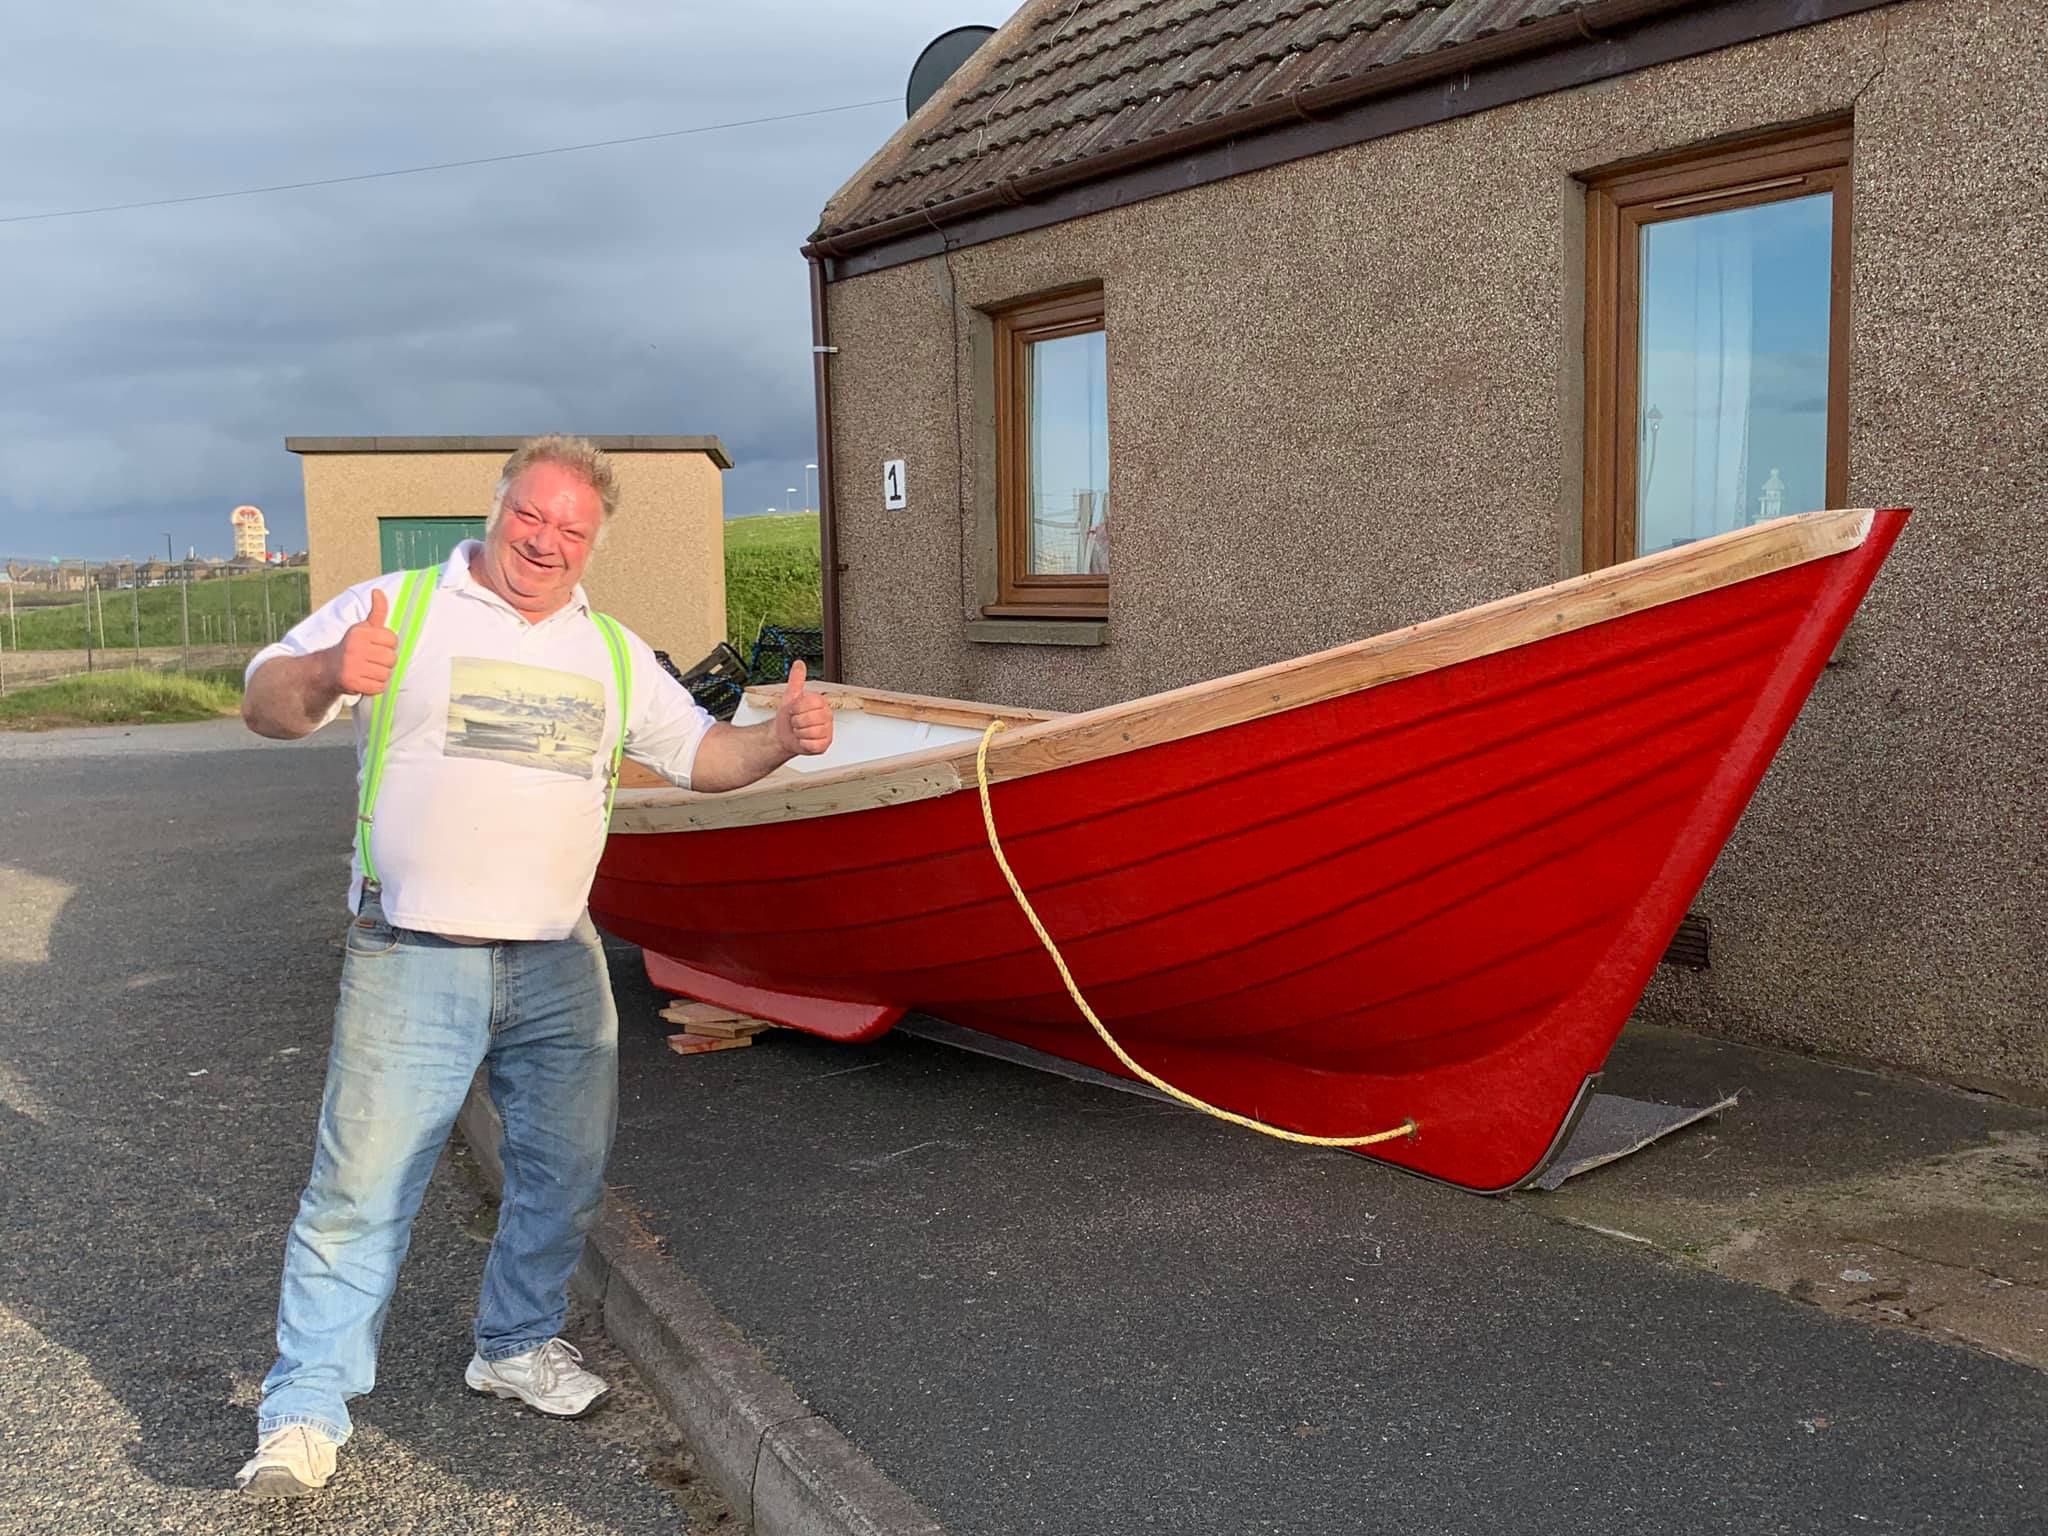 George Cameron with his boat